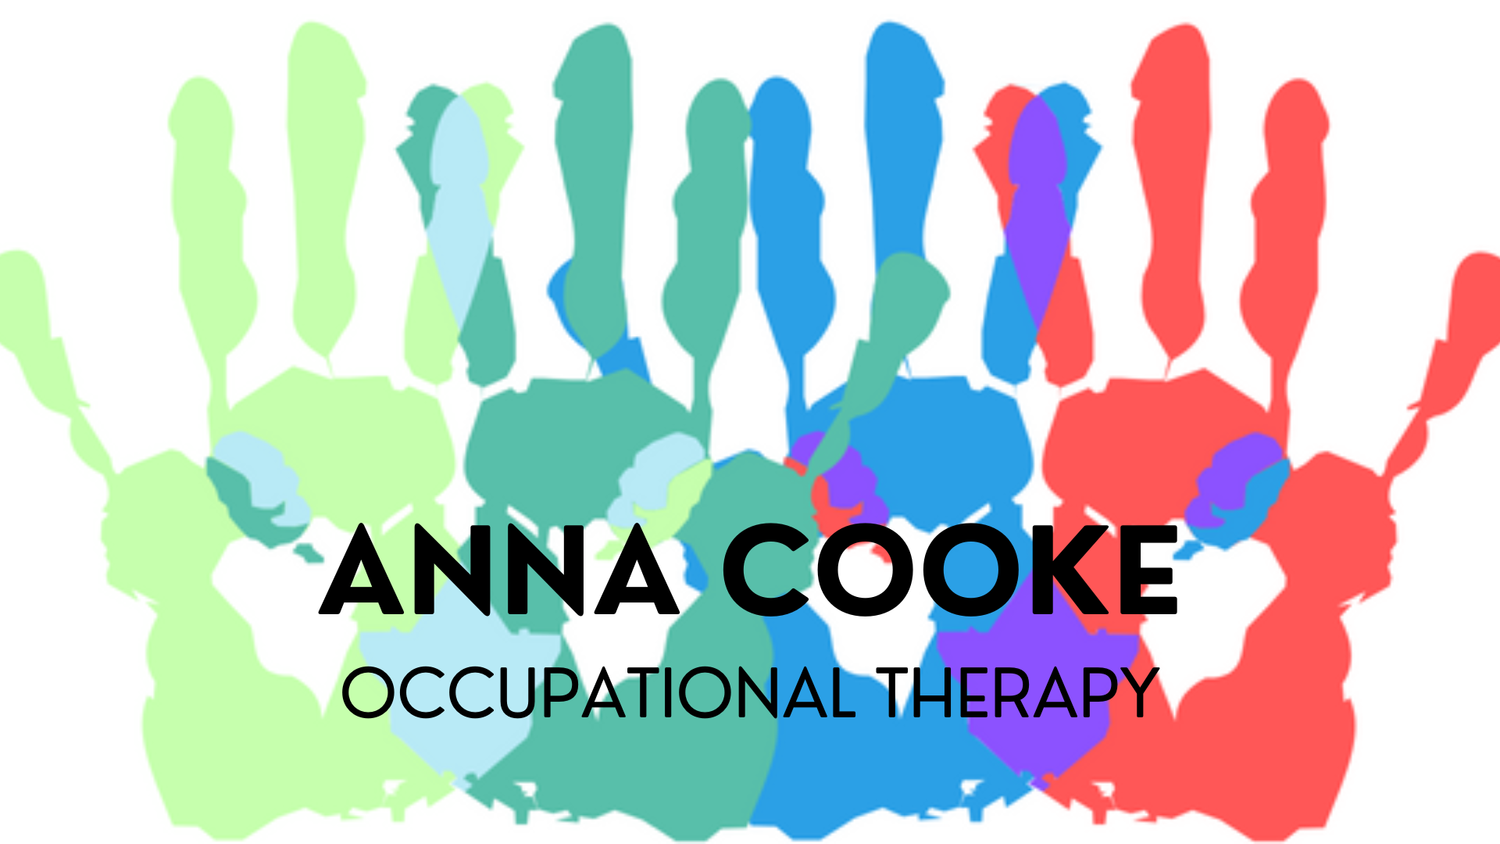 Anna Cooke Occupational Therapy